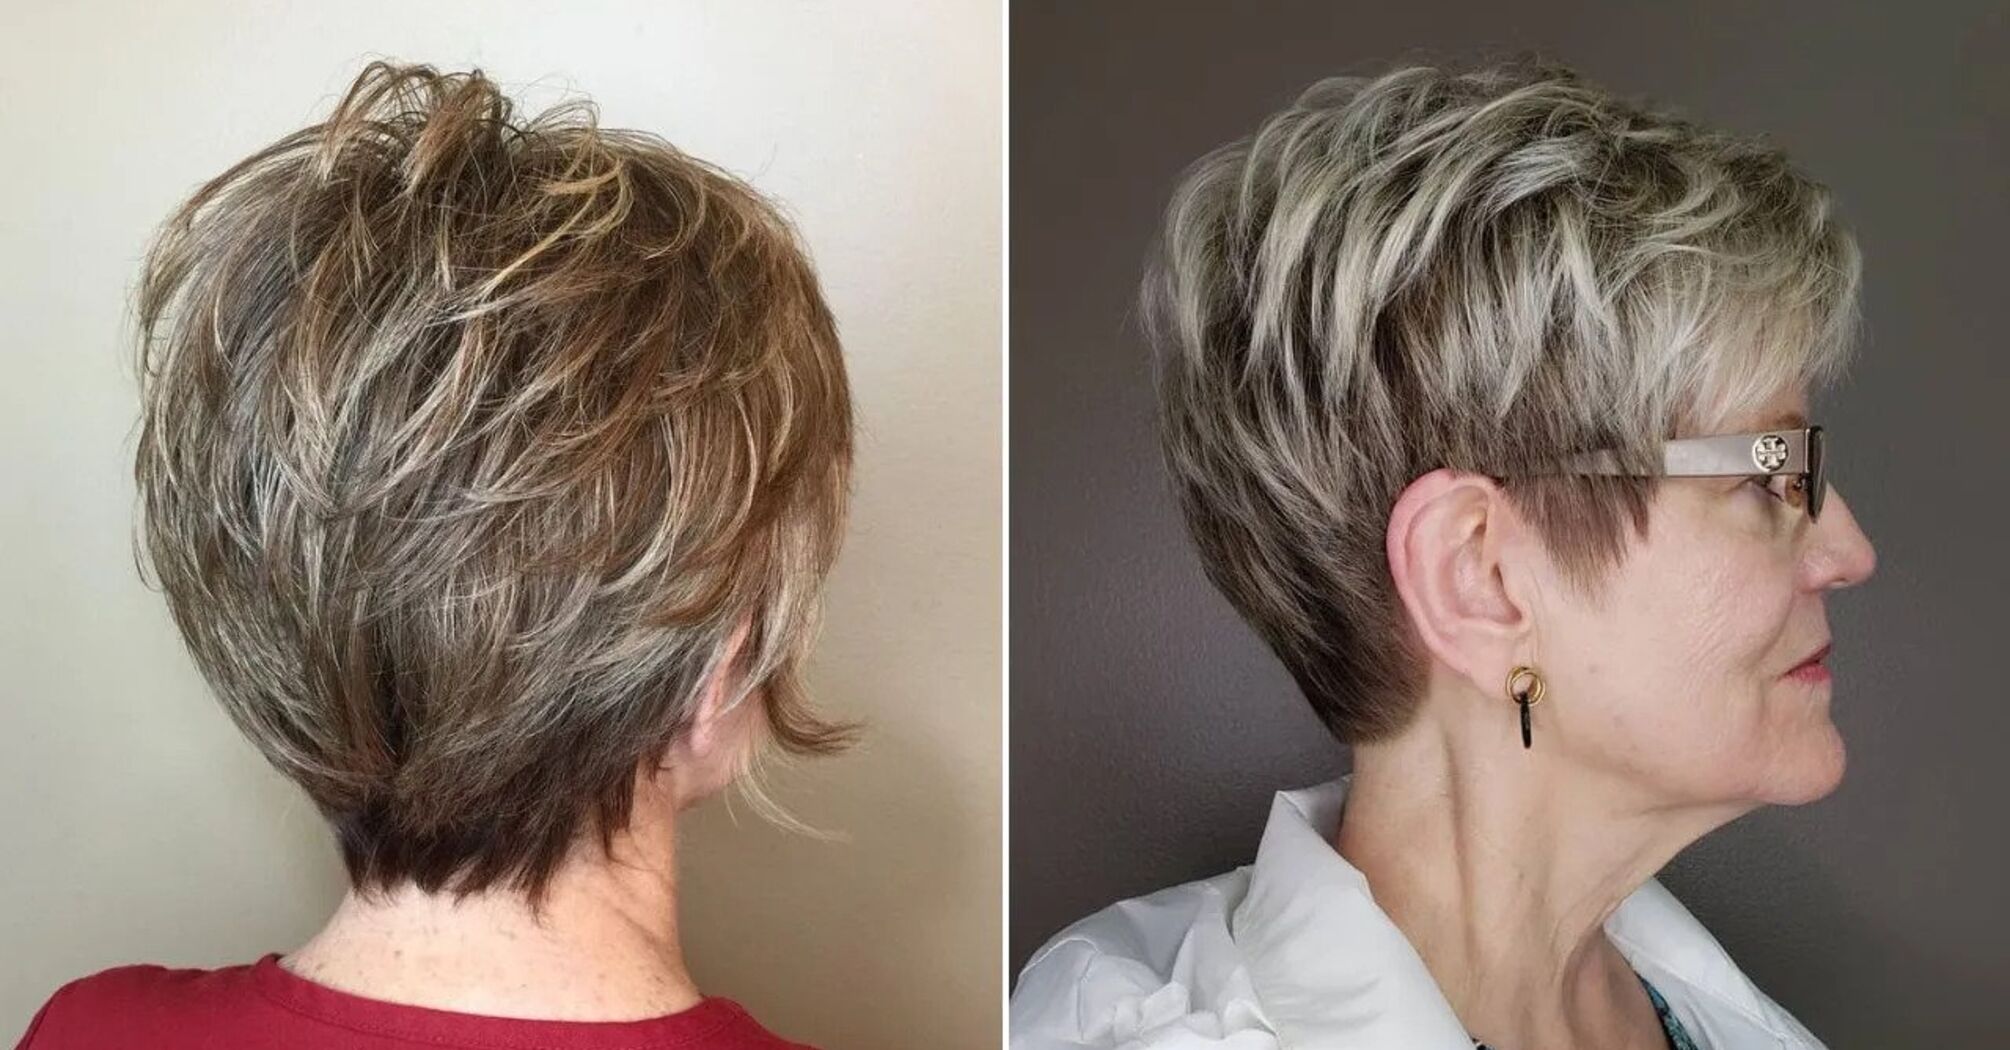 Top 5 rejuvenating haircuts for women over 50